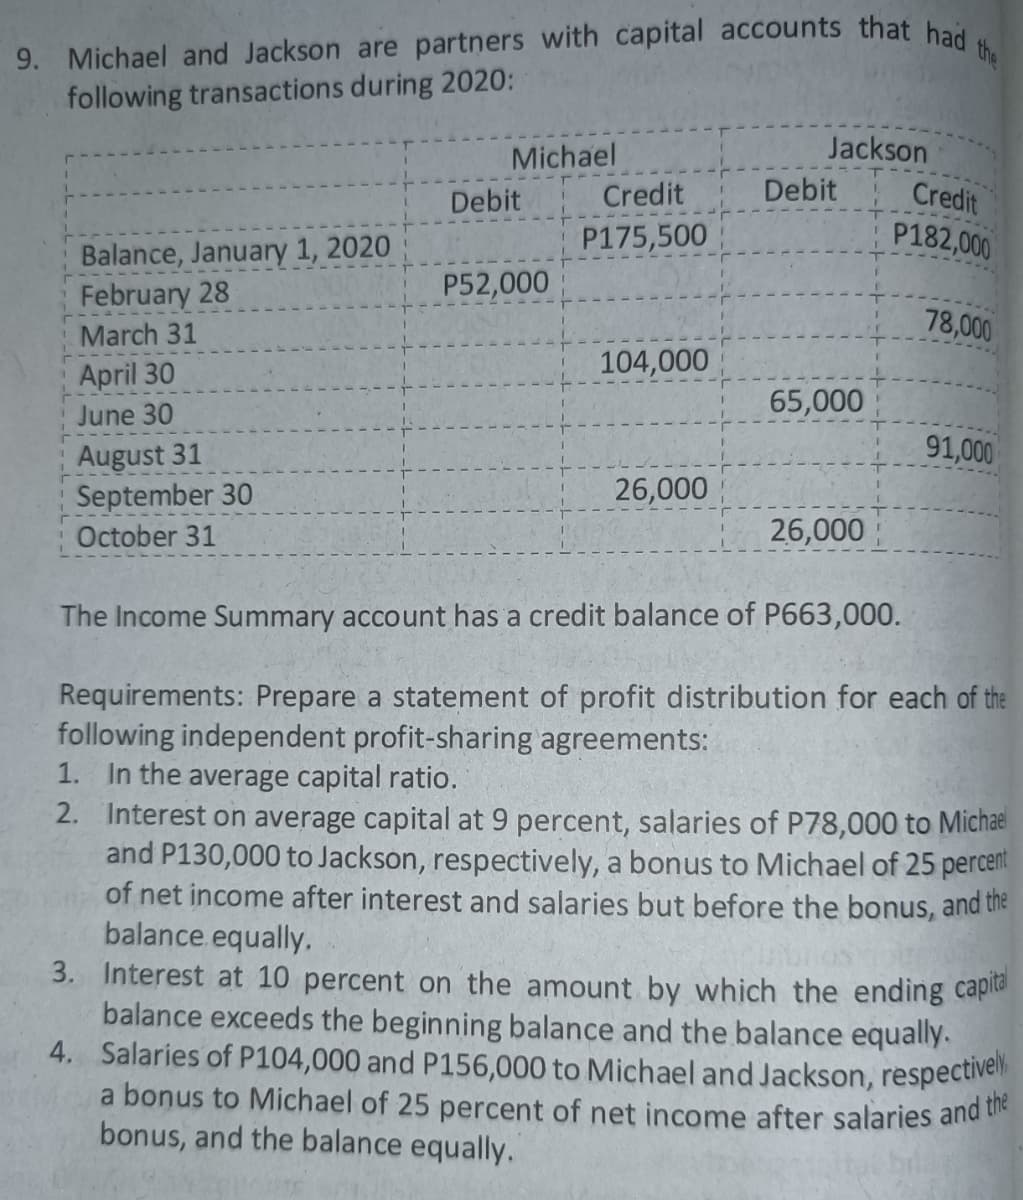 9. Michael and Jackson are partners with capital accounts that had
following transactions during 2020:
the
Michael
Jackson
Debit
Credit
P182,000
Debit
Credit
P175,500
Balance, January 1, 2020
February 28
P52,000
78,000
March 31
104,000
April 30
65,000
June 30
91,000
August 31
September 30
October 31
26,000
26,000
The Income Summary account has a credit balance of P663,000.
Requirements: Prepare a statement of profit distribution for each of the
following independent profit-sharing agreements:
1. In the average capital ratio.
2. Interest on average capital at 9 percent, salaries of P78,000 to Michael
and P130,000 to Jackson, respectively, a bonus to Michael of 25 percent
of net income after interest and salaries but before the bonus, and the
balance.equally.
3. Interest at 10 percent on the amount by which the ending caplie
balance exceeds the beginning balance and the balance equally.
4. Salaries of P104,000 and P156,000 to Michael and Jackson, respective
a bonus to Michael of 25 percent of net income after salaries and t
bonus, and the balance equally.
L--L
